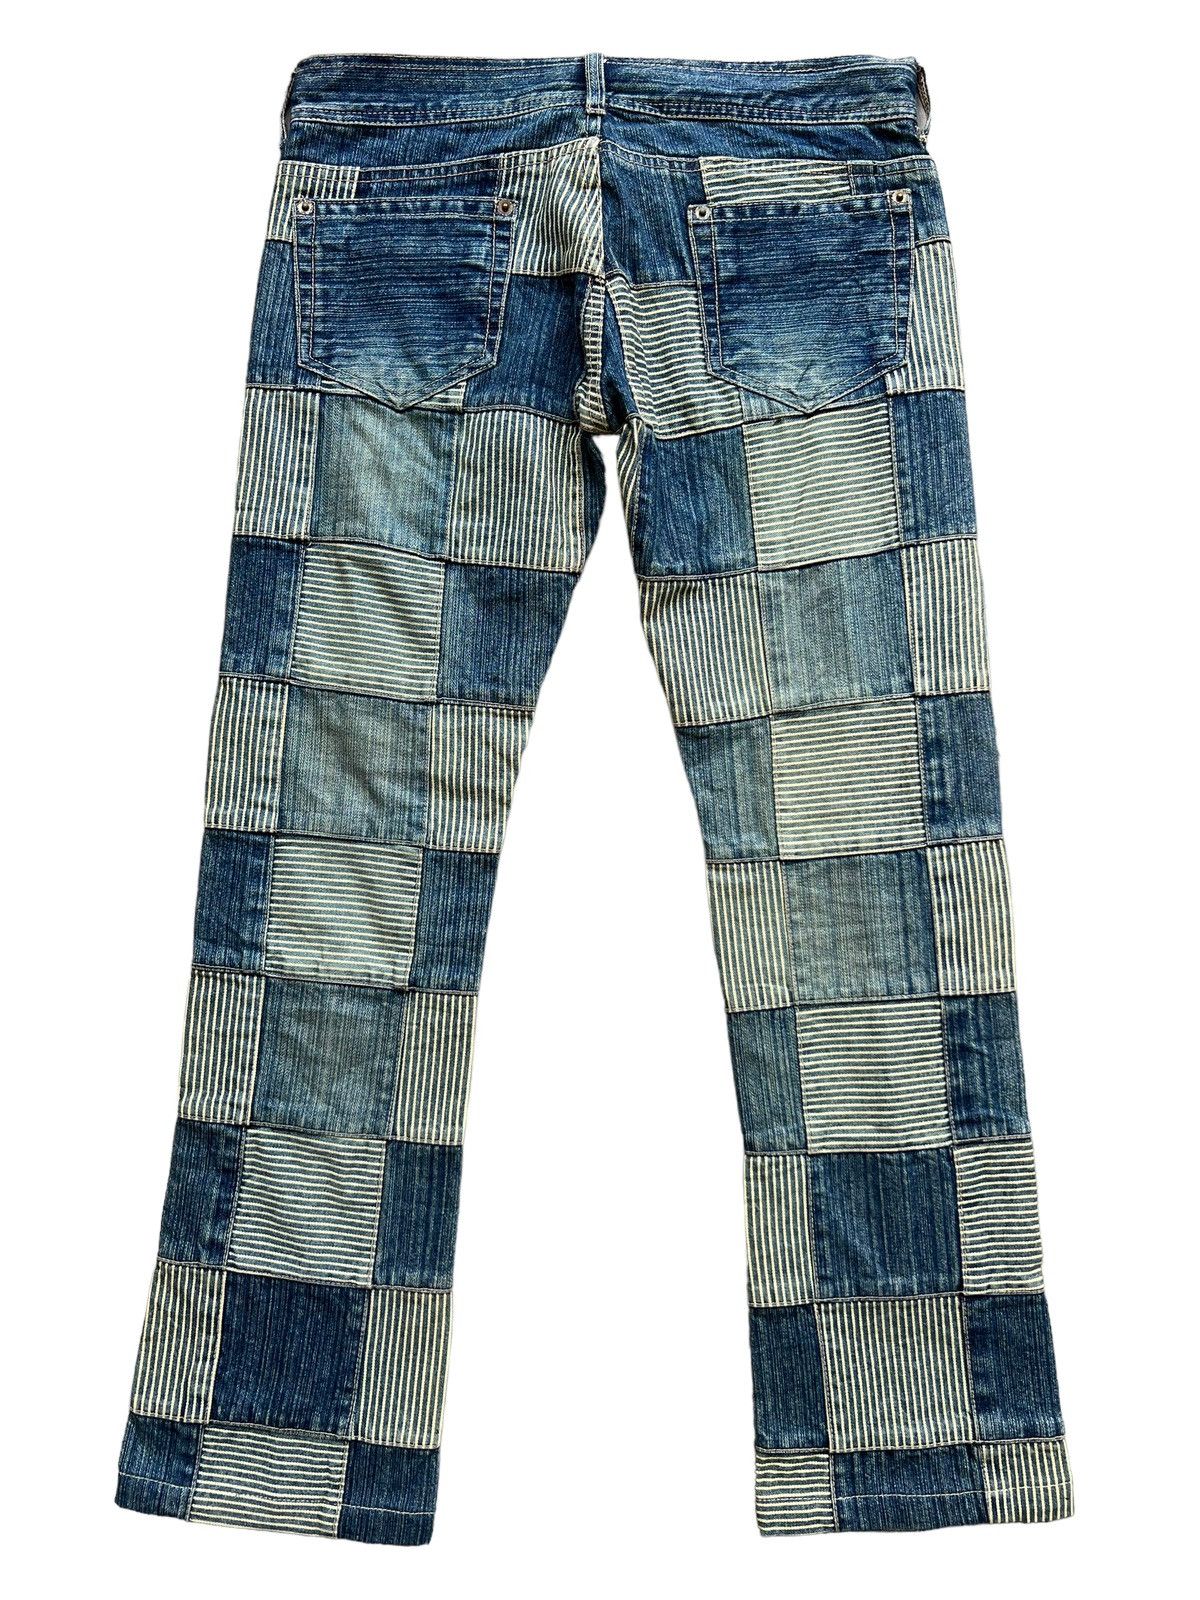 Japanese Brand Inspired by Kapital Patchwork Jeans 31x28.5 - 3